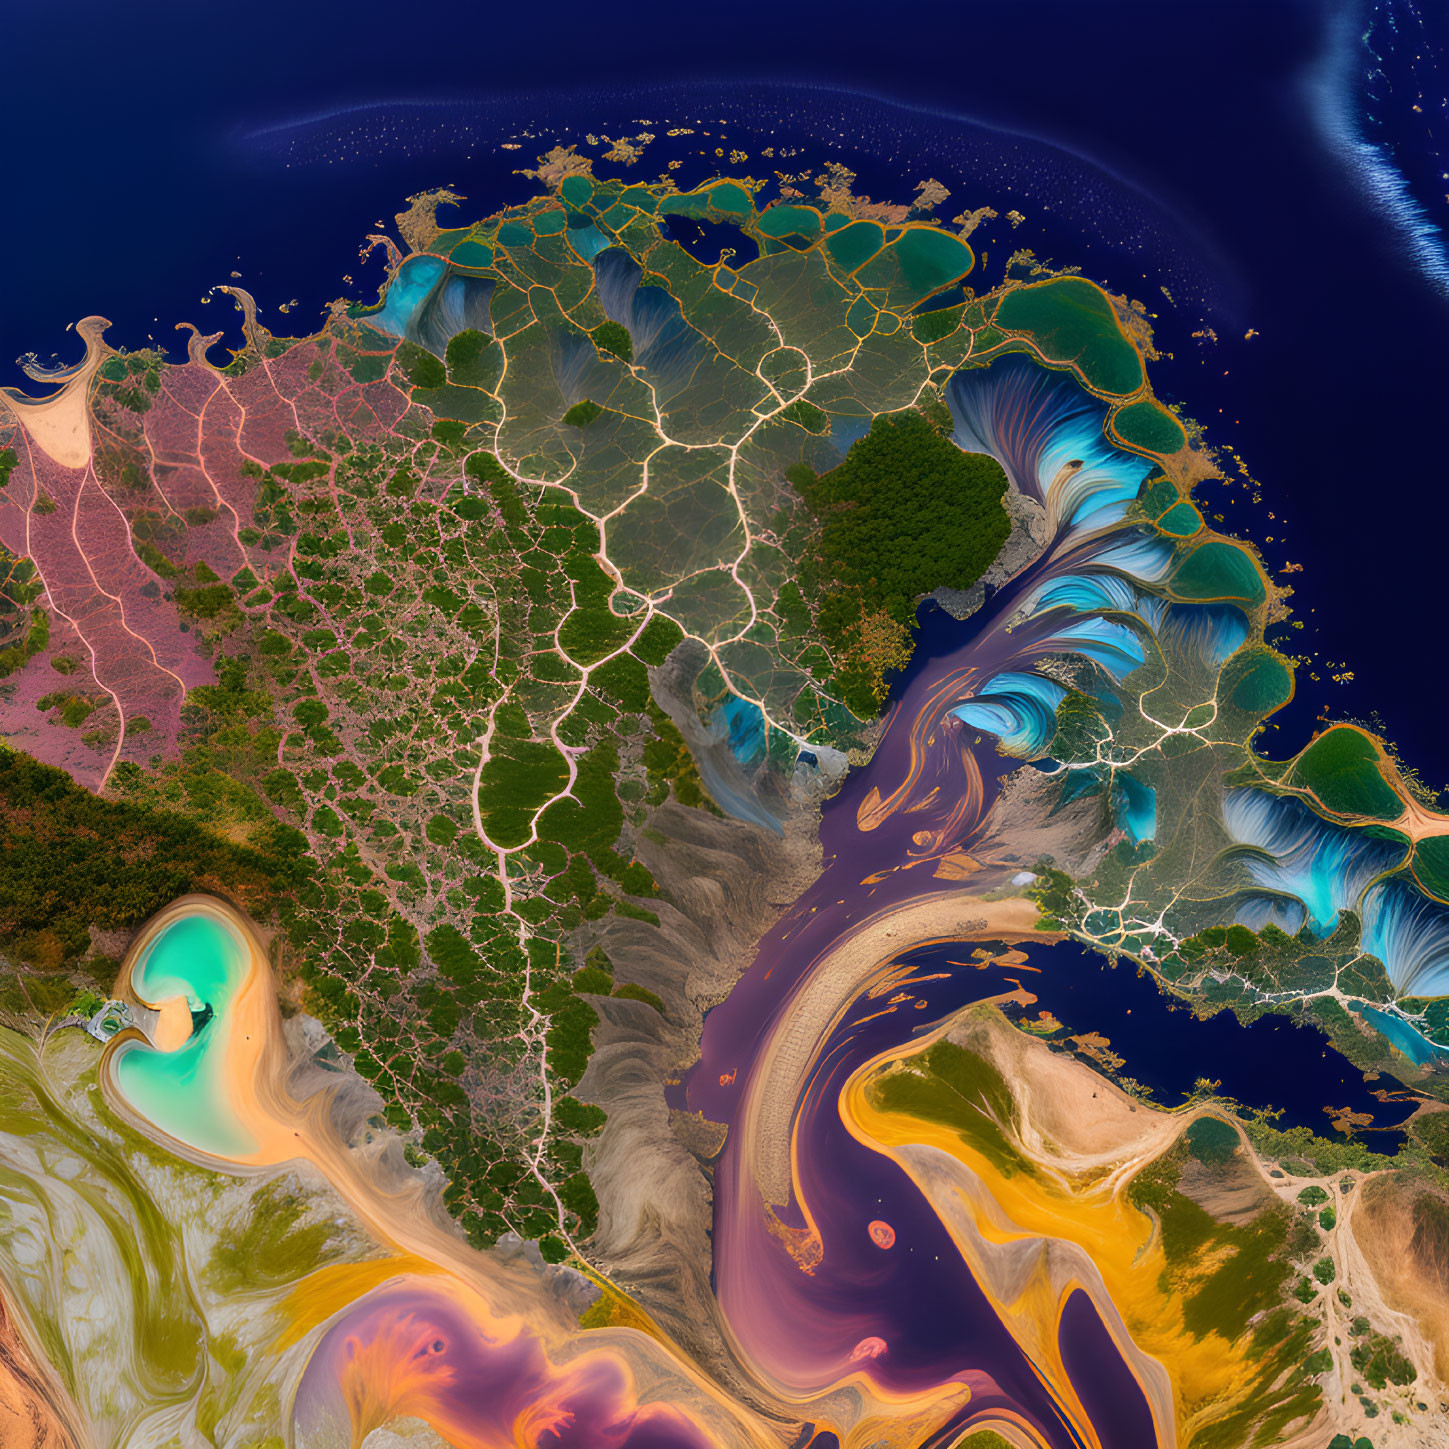 A photo of a colorful river delta taken from a sat